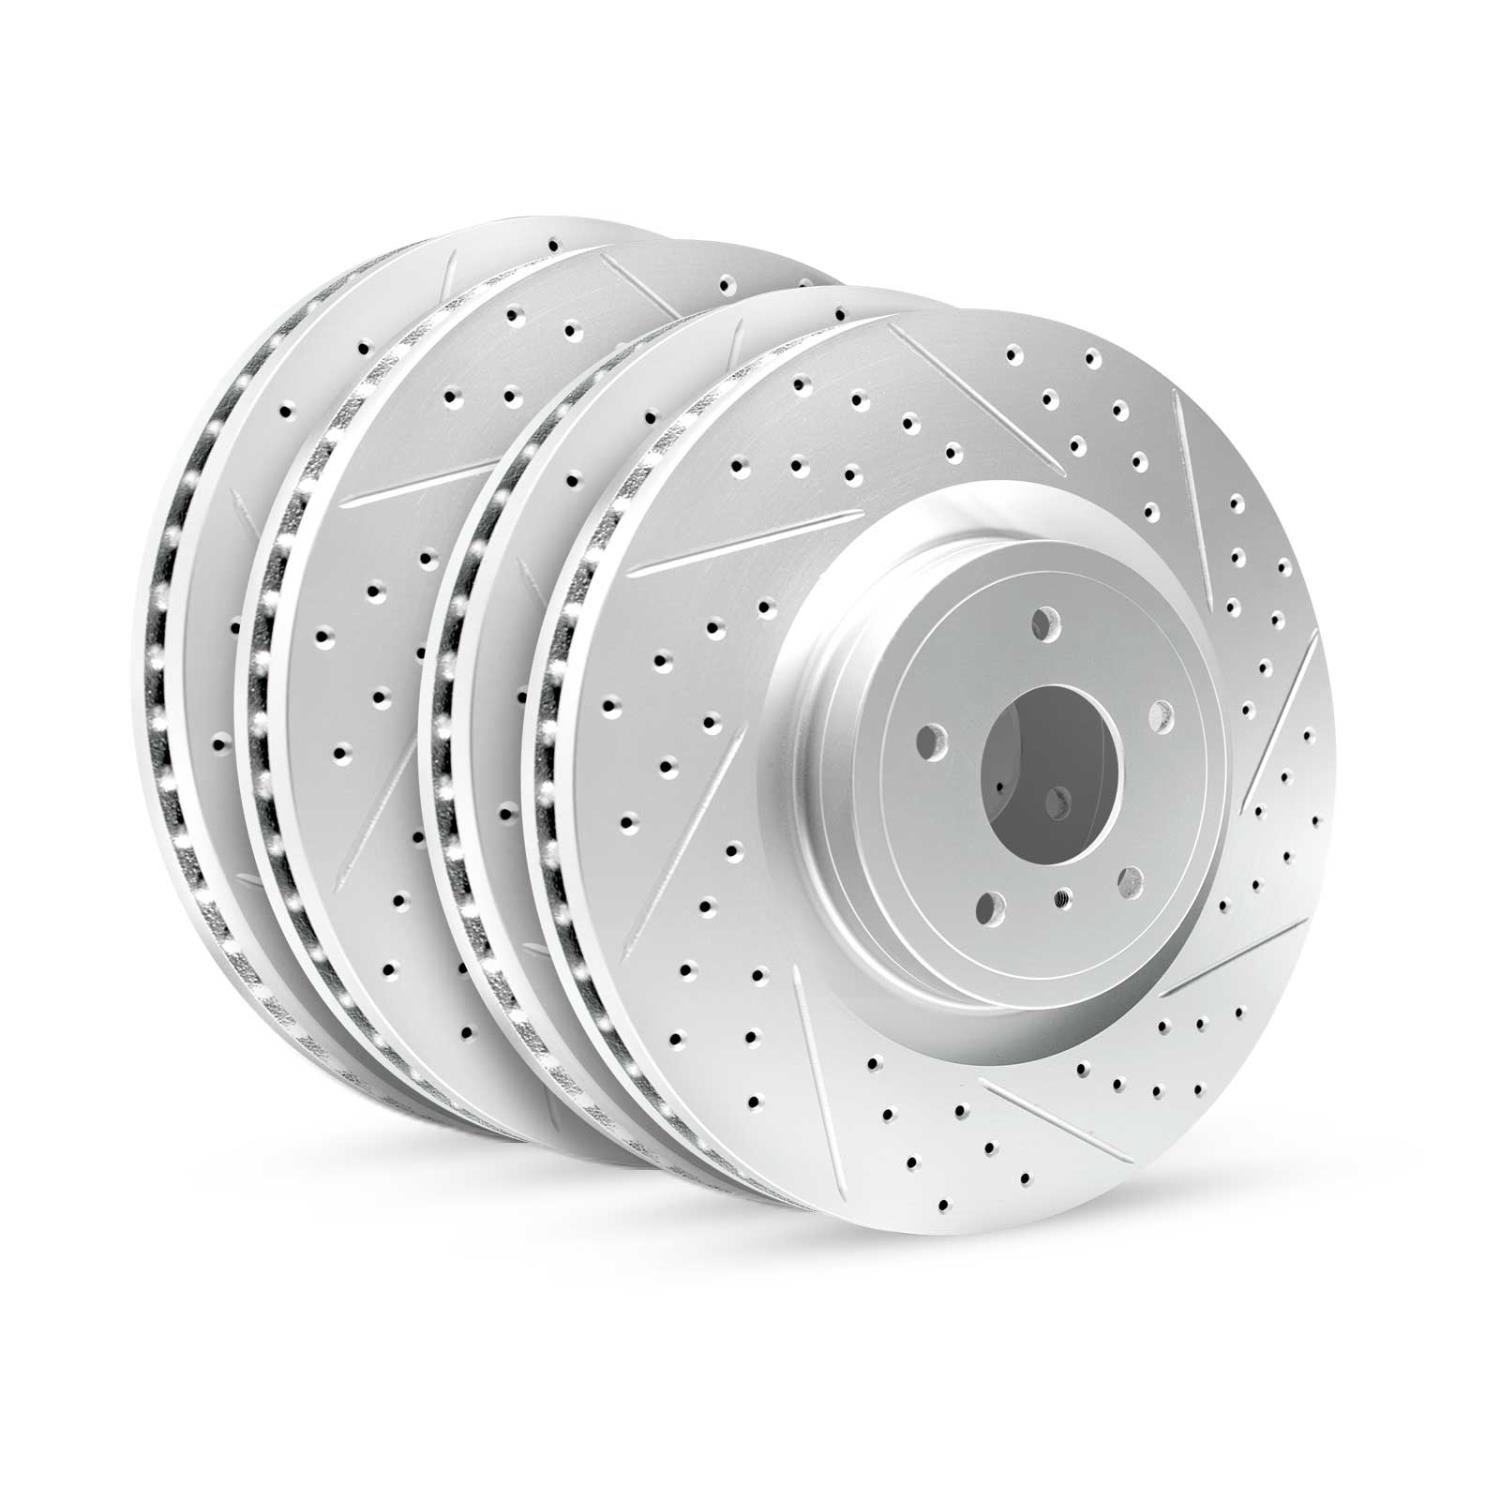 GEO-Carbon Drilled/Slotted Rotors, 2014-2016 Acura/Honda, Position: Front/Rear